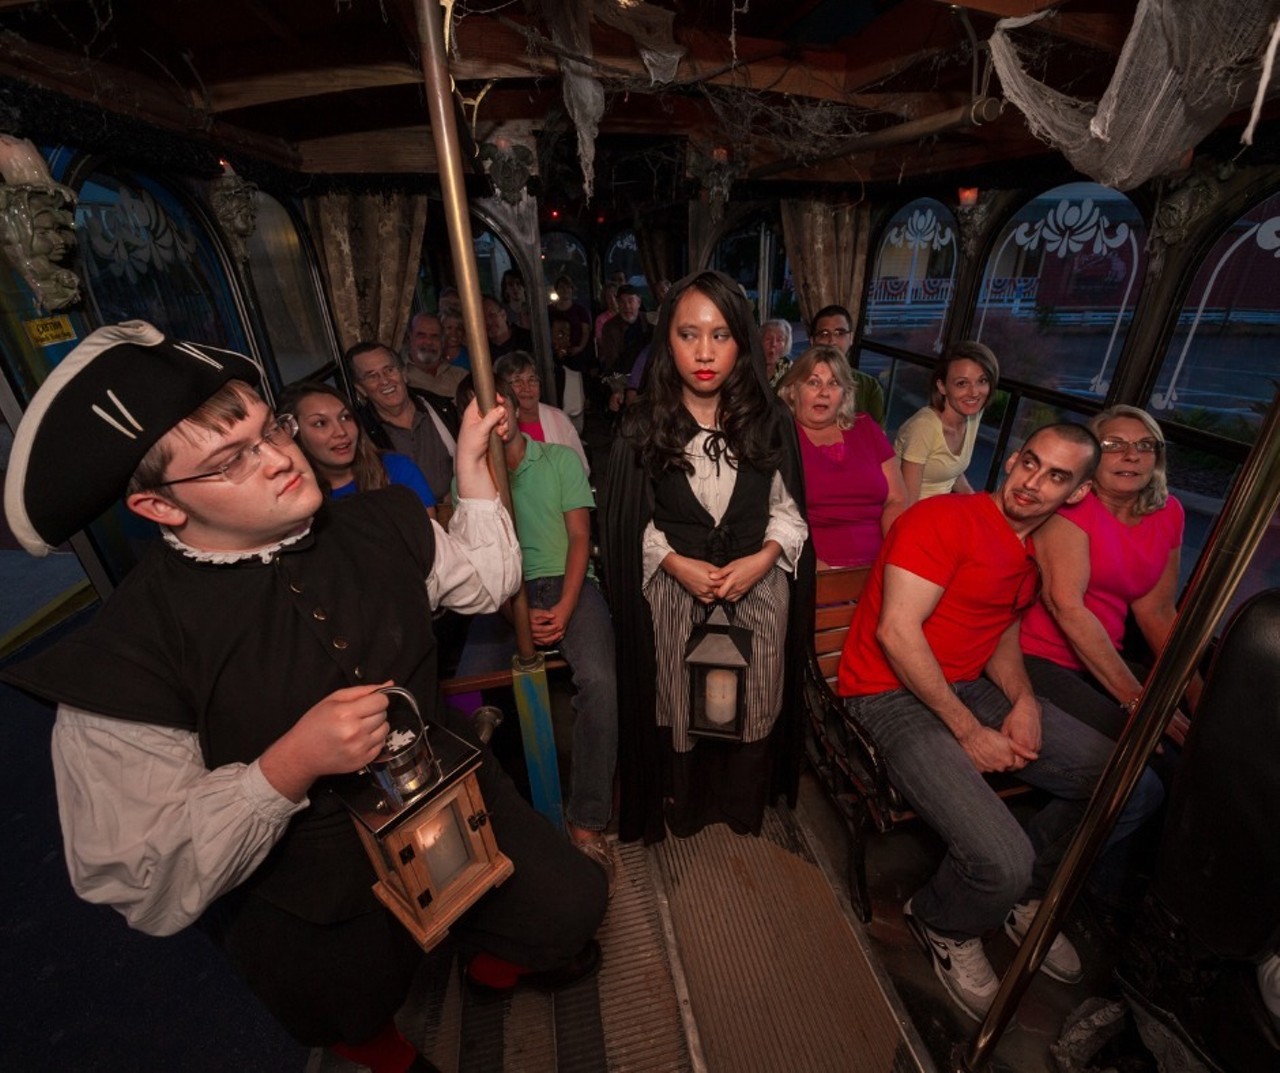 St. Augustine Ghost Tours
1 hour and 45 minutes from Orlando
On top of the essential historical sights and kitschy shopping, St. Augustine is also home to some killer ghost tours. Ranging from family-friendly to scary and boozy, there’s a ton of ways to get in touch with the other side.